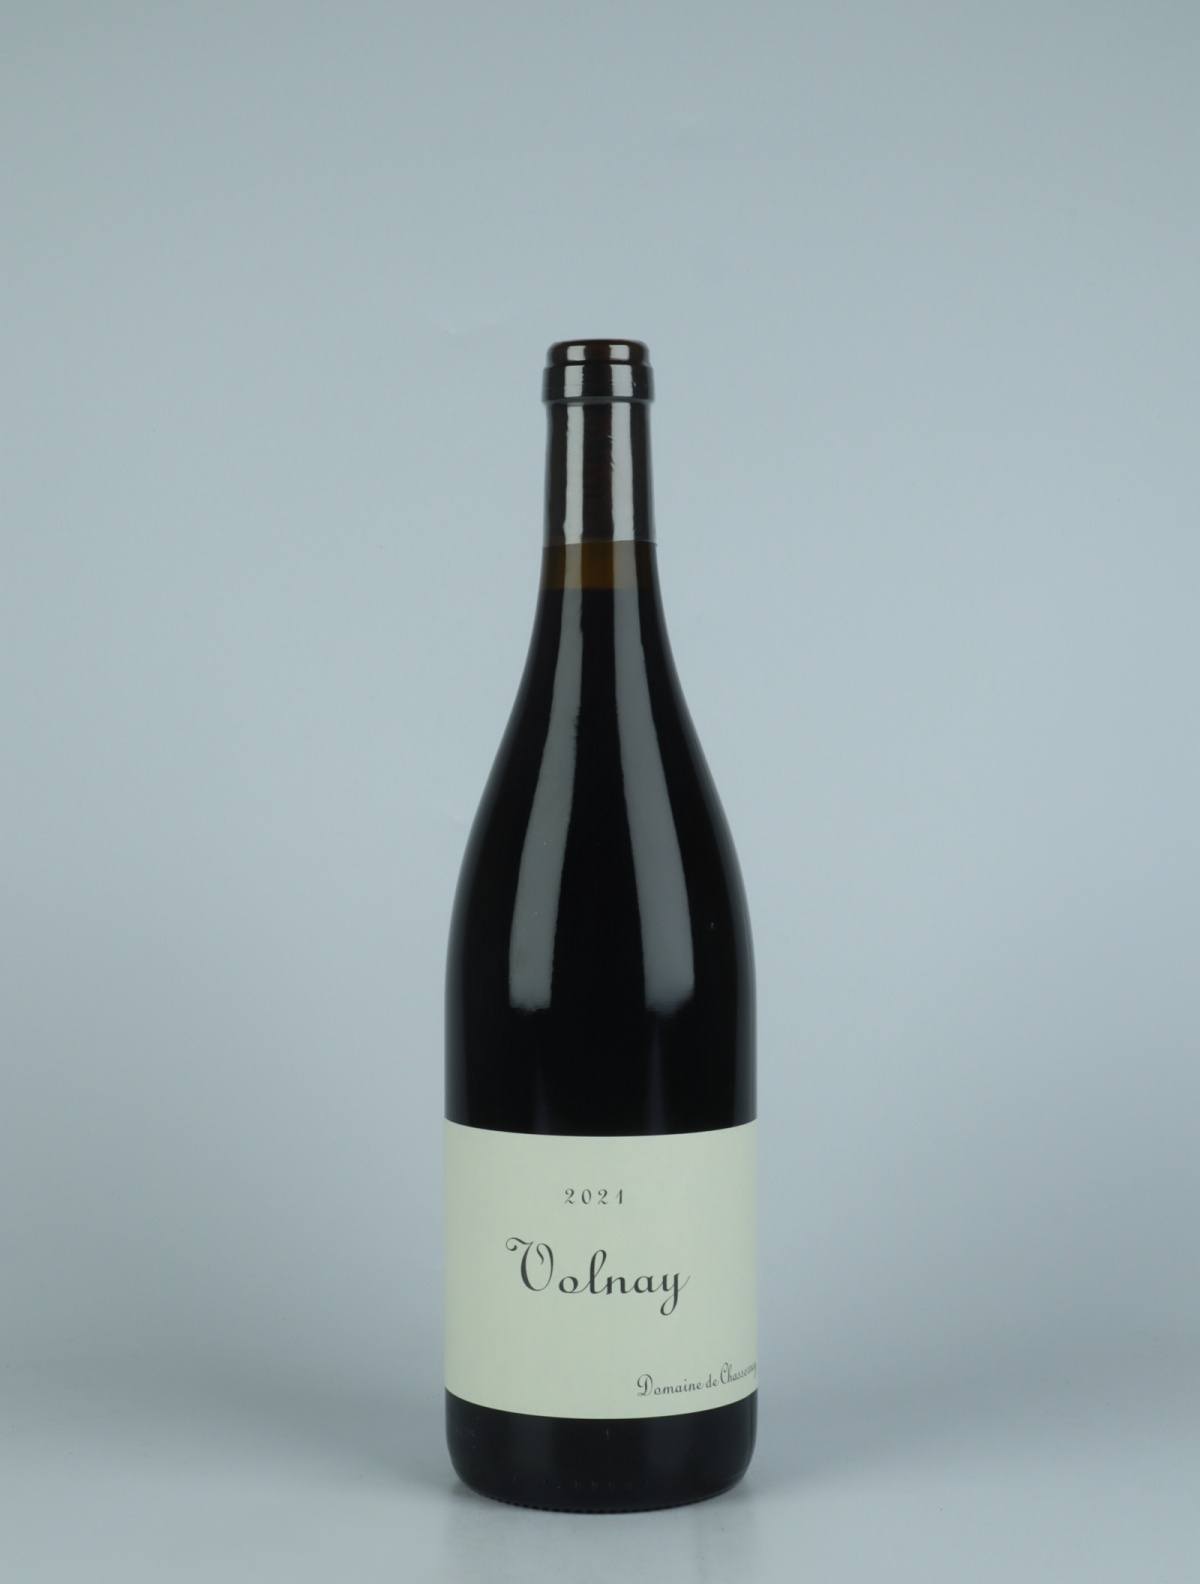 A bottle 2021 Volnay Red wine from Domaine de Chassorney, Burgundy in France